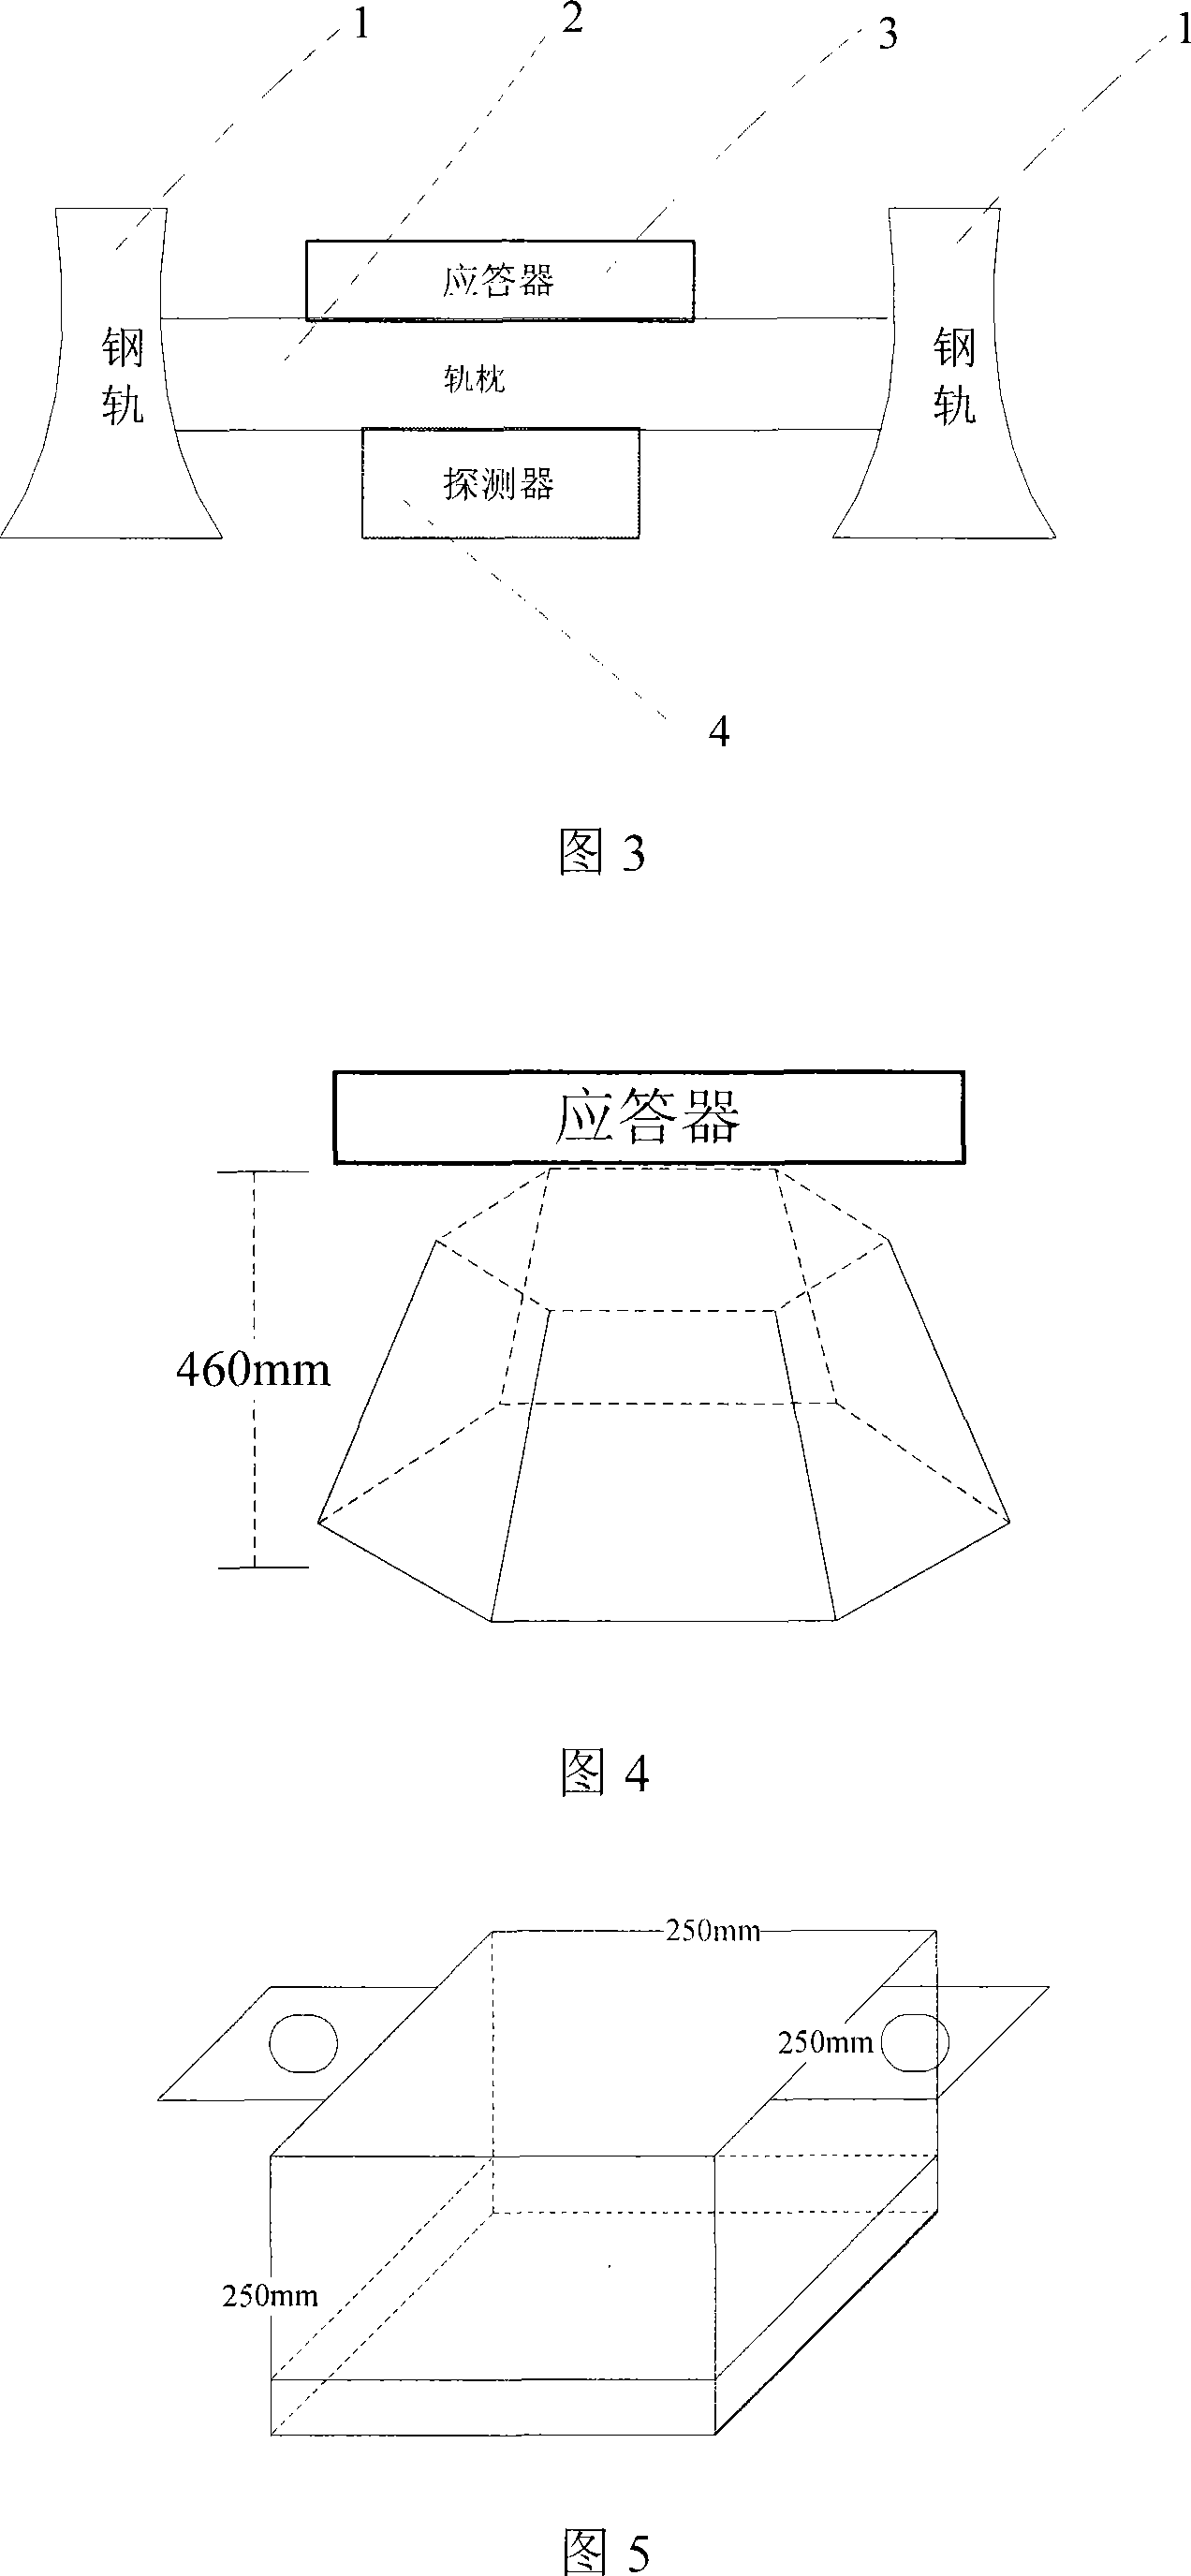 Detecor using method of f answering device detecting system